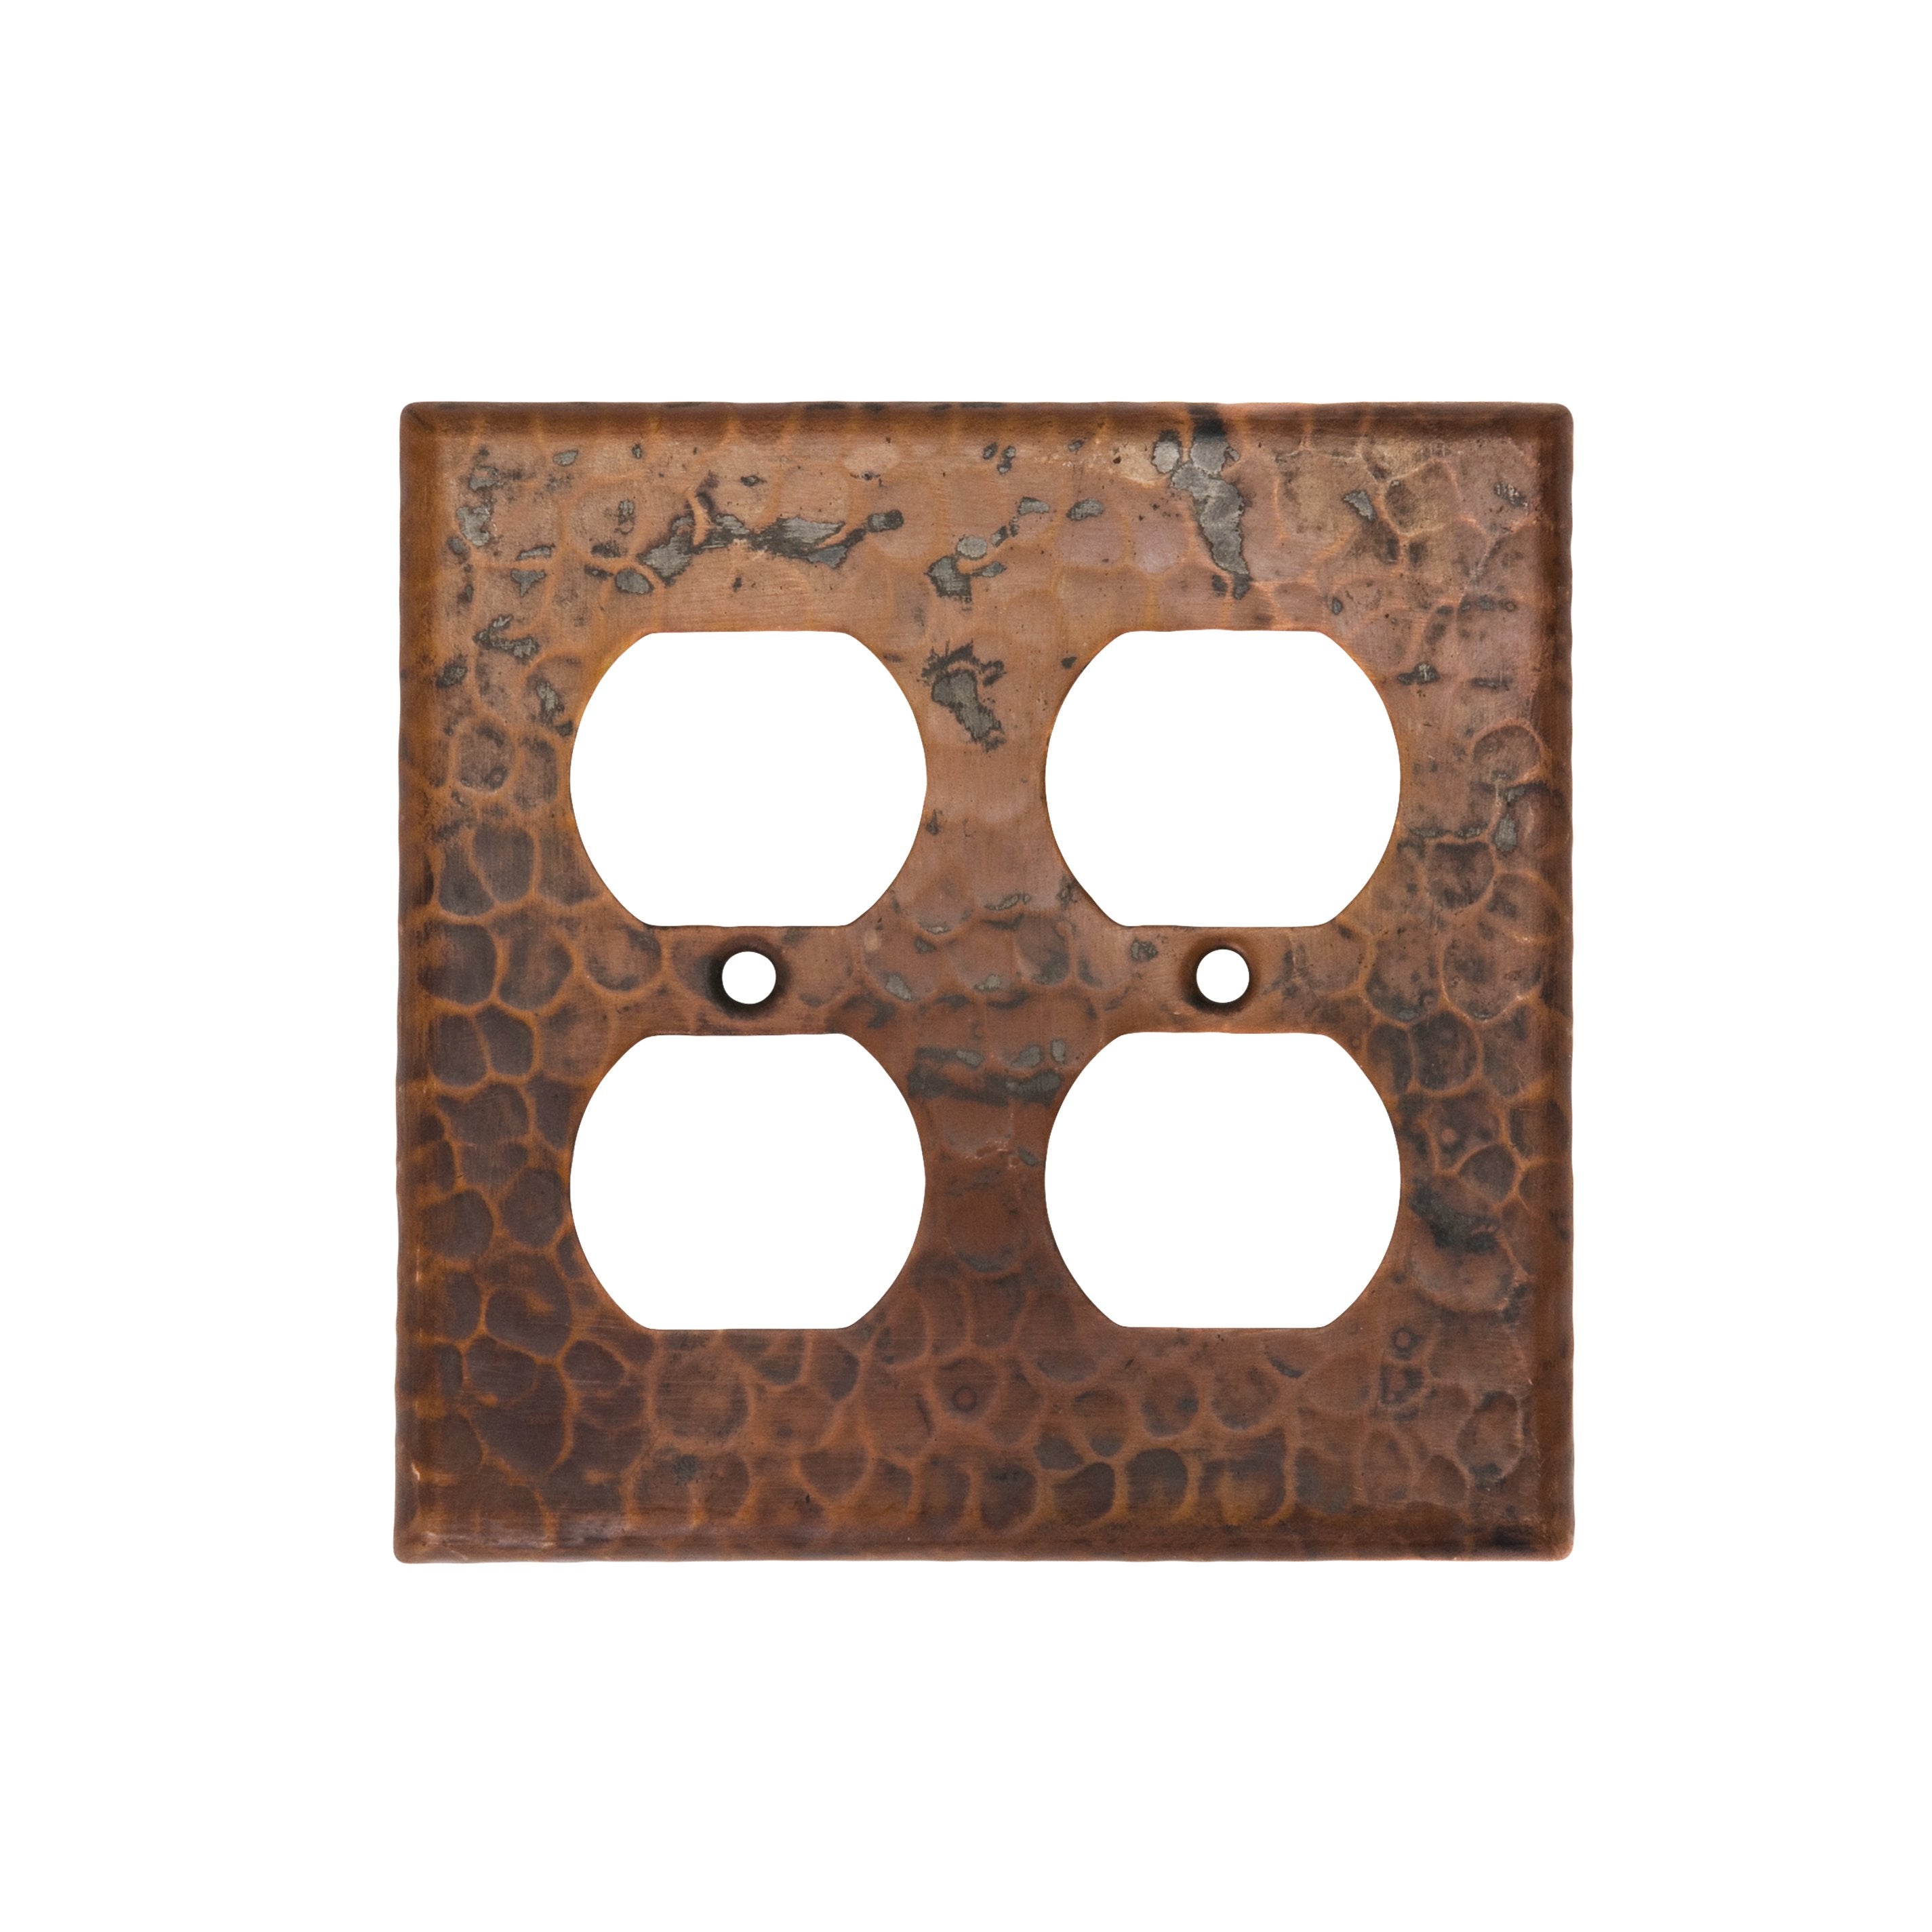 Premier Copper Products Copper Switchplate Double Duplex, 4 Hole Outlet Cover-DirectSinks